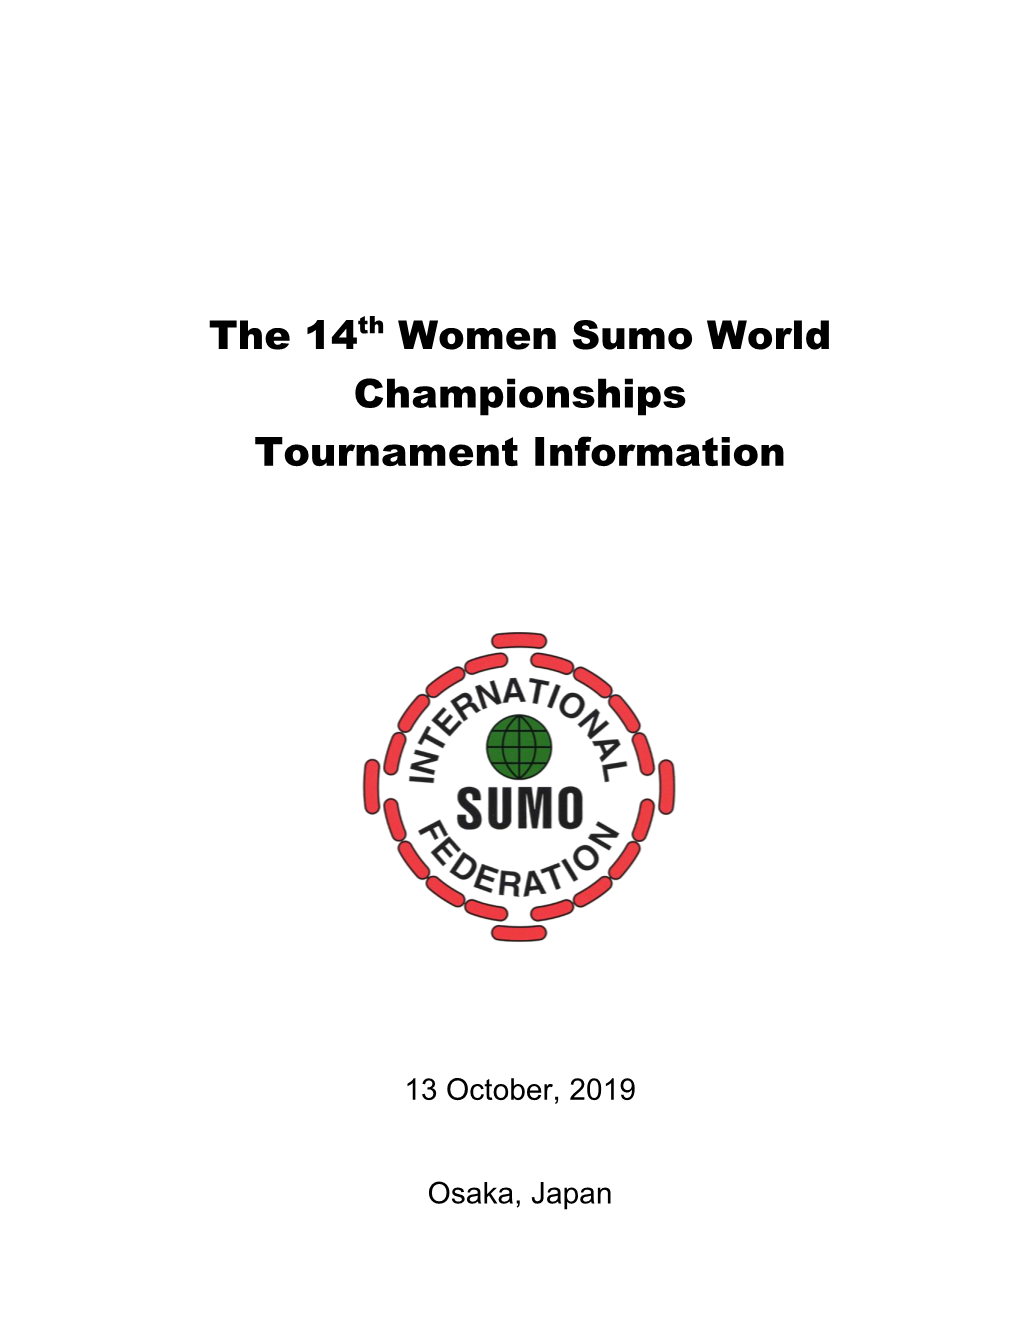 The 22Nd World Sumo Championships